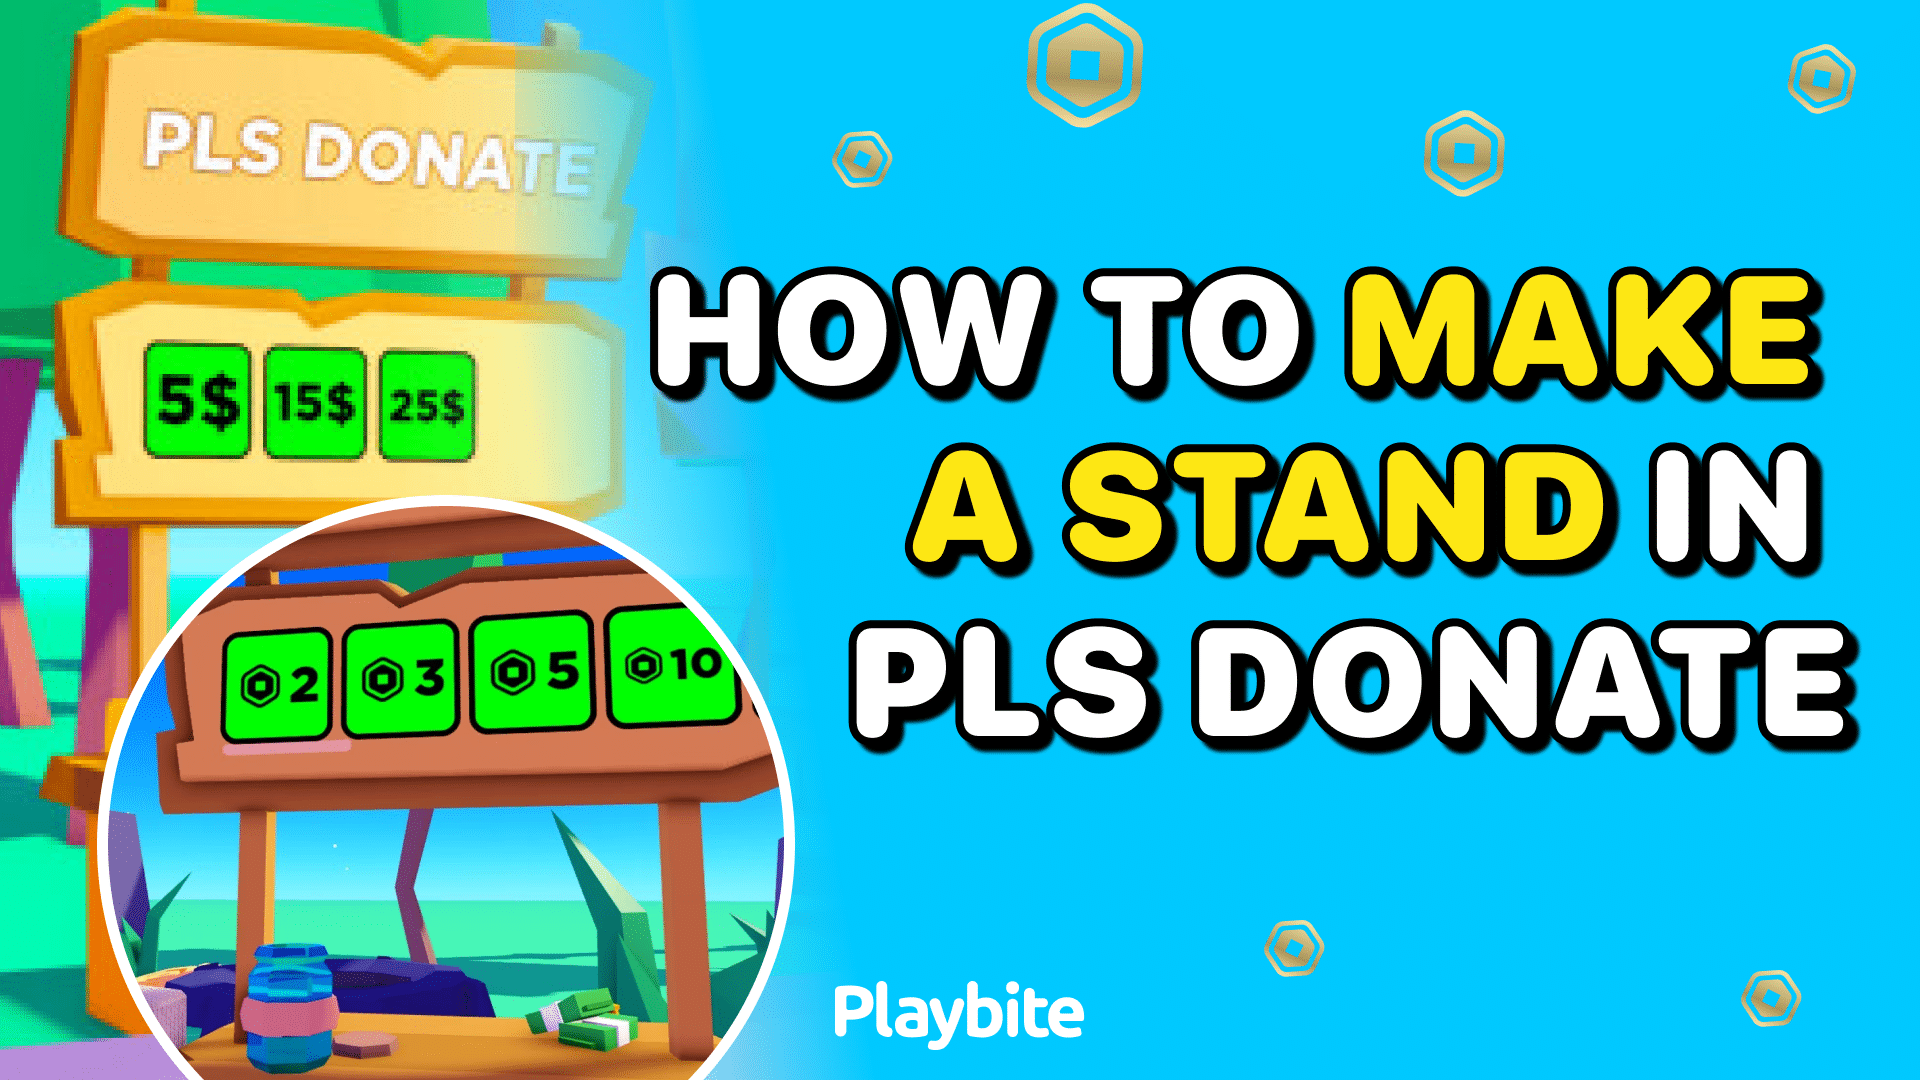 How To Make A Stand In PLS DONATE